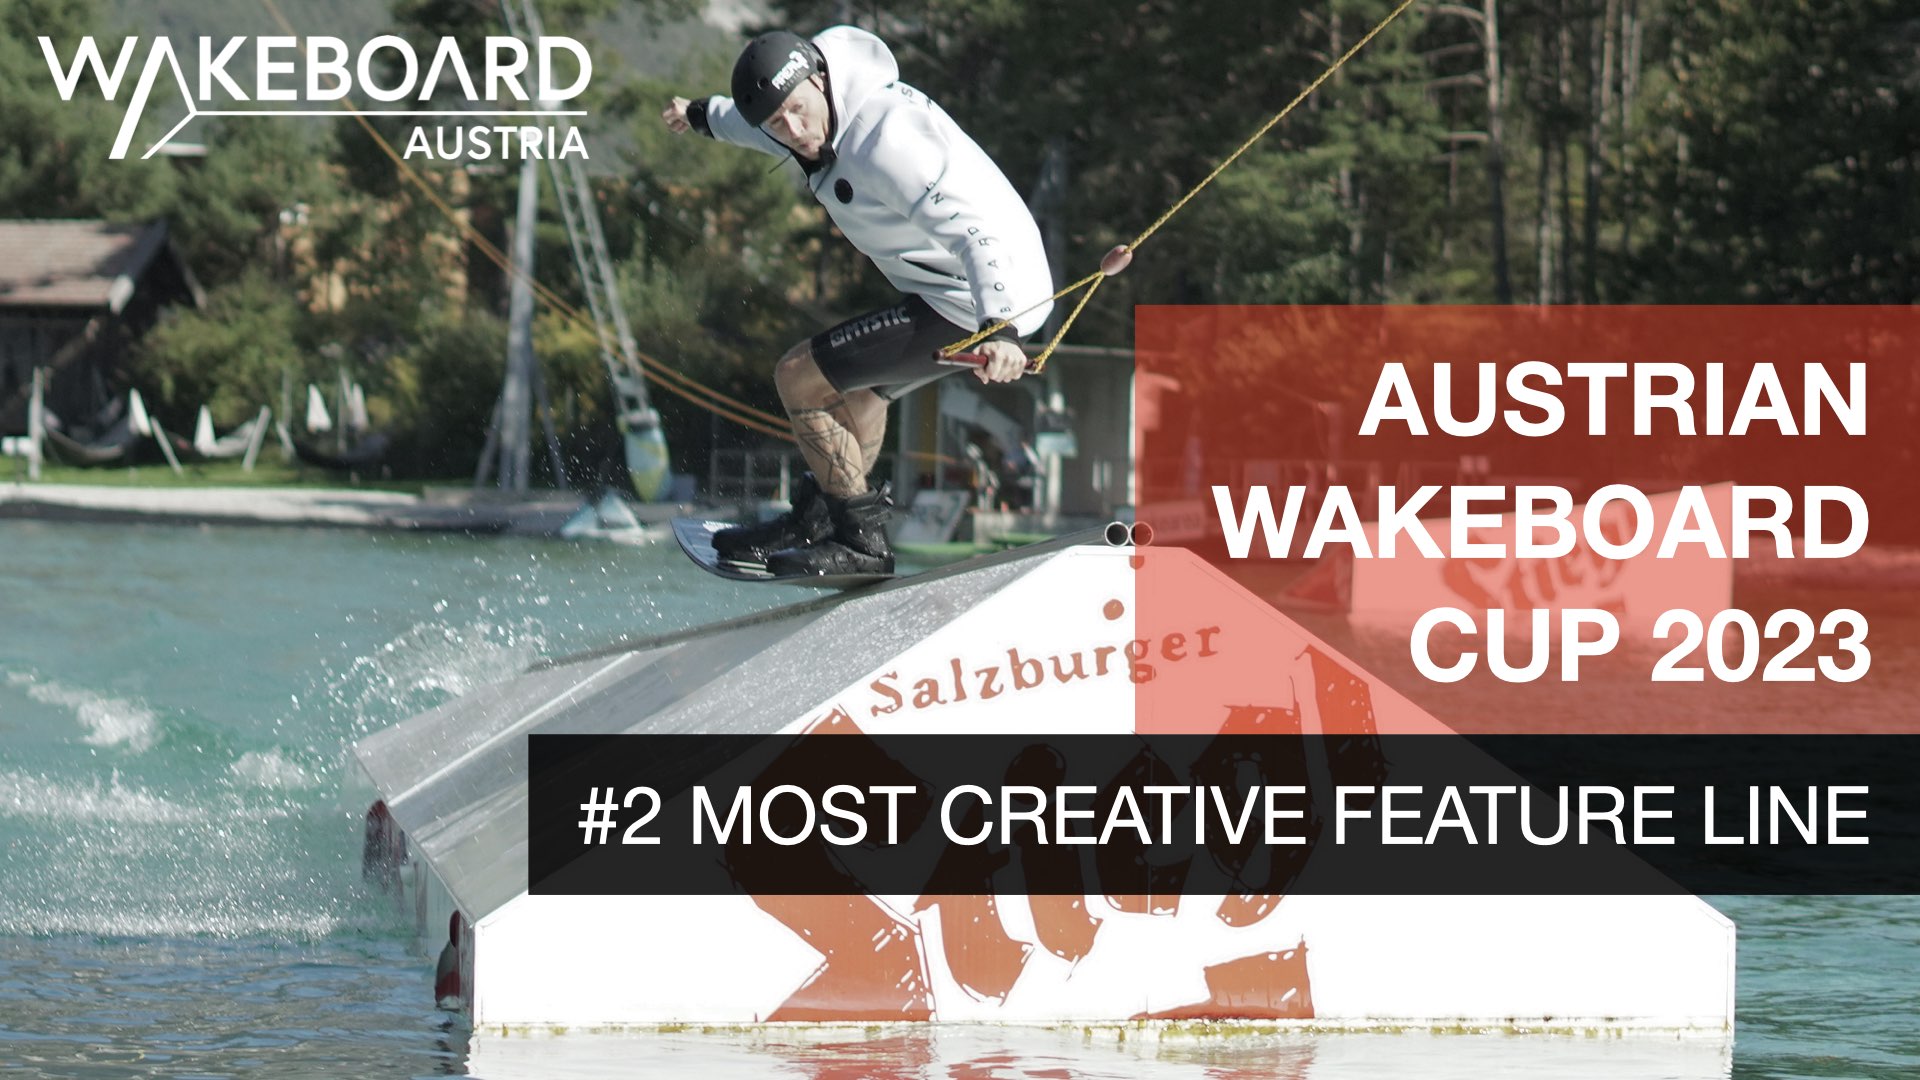 Austrian Wakeboard Cup 2023: #2 Most Creative Feature Line